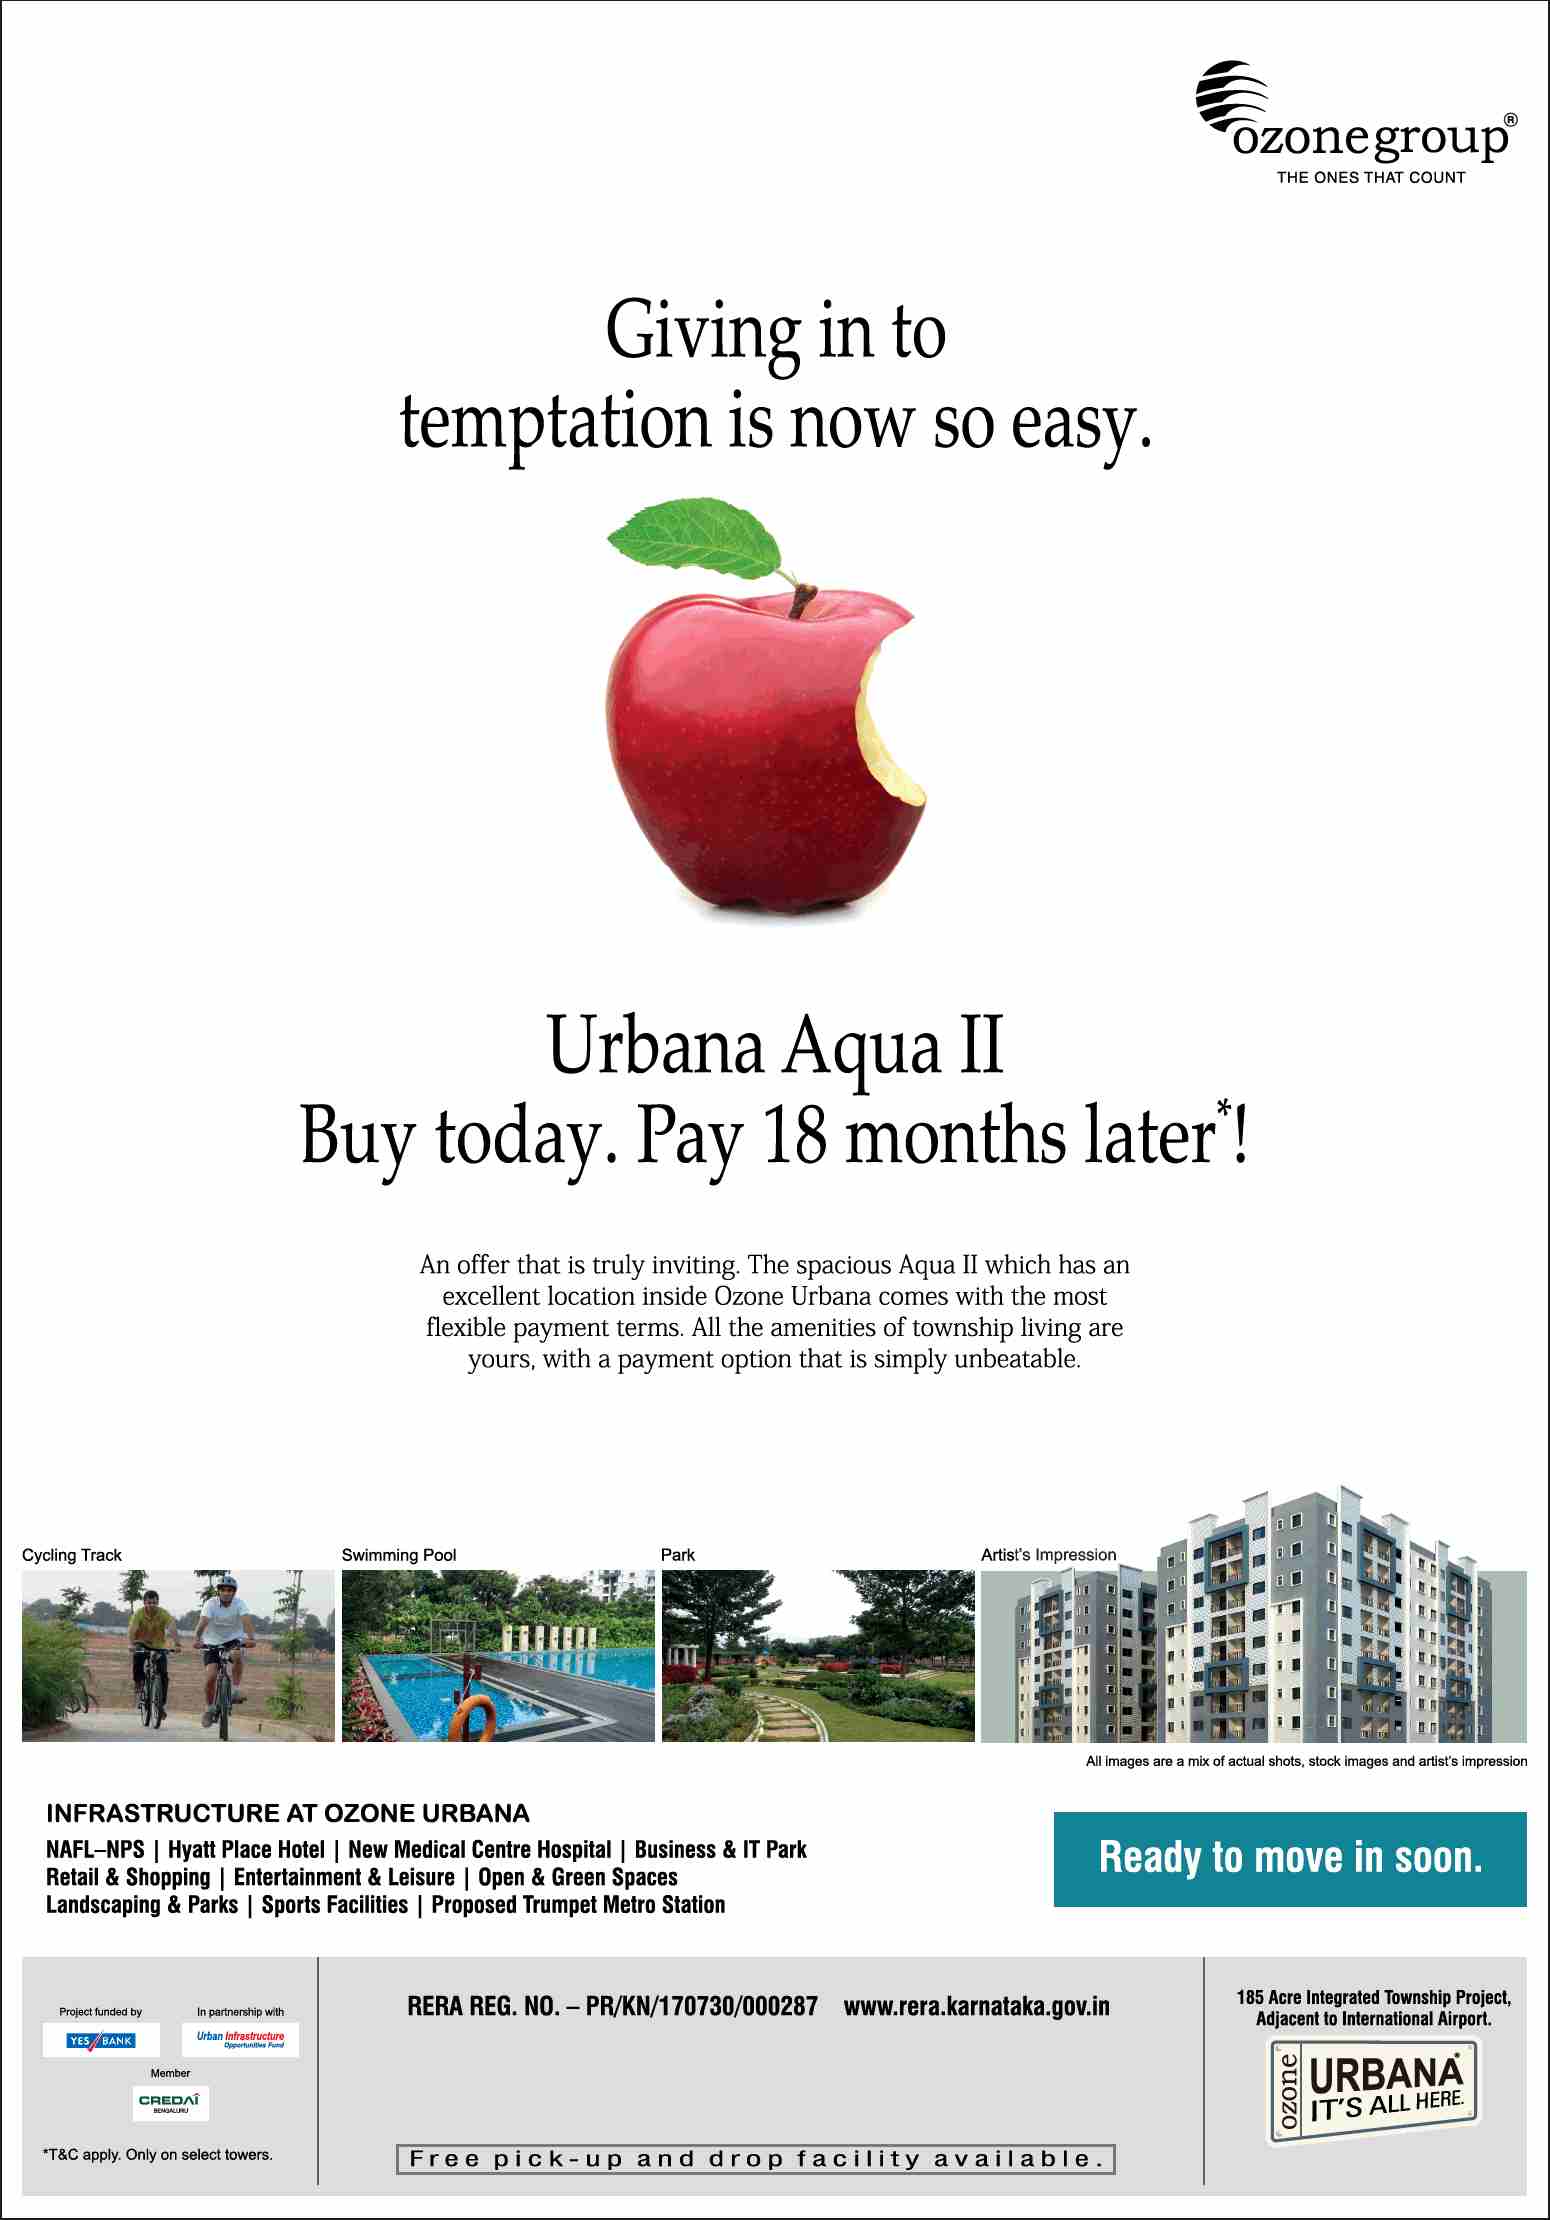 Buy today & pay 18 months later at Ozone Urbana Aqua 2 in Bangalore